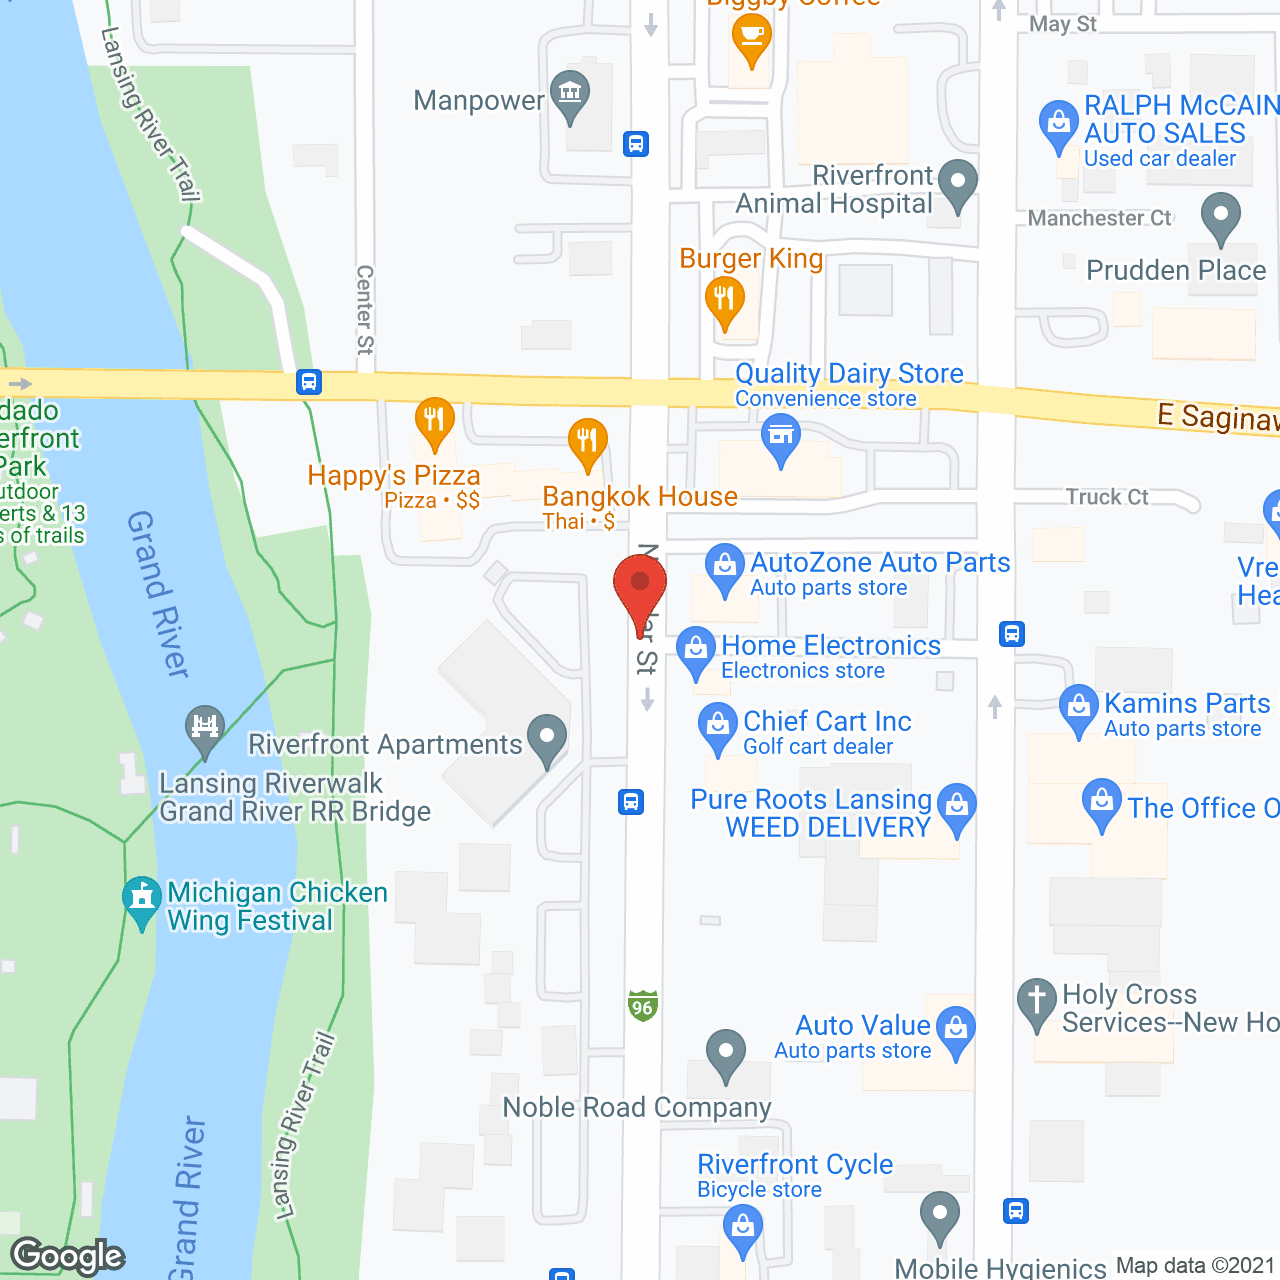 Riverfront Apartments in google map